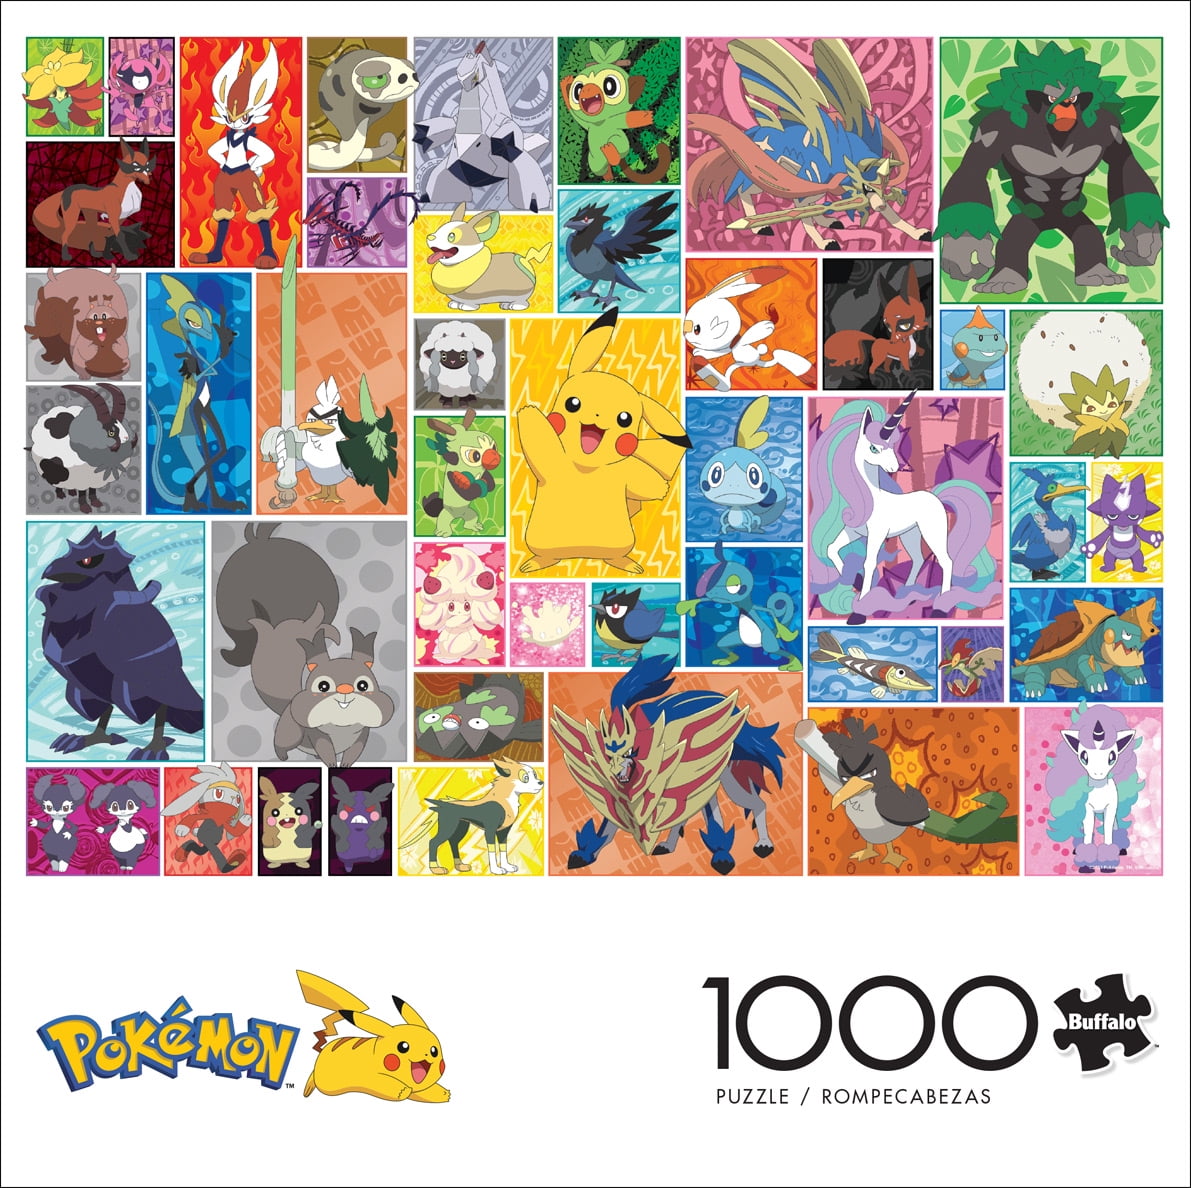 Pokemon Frames Collage 1000pc Jigsaw Puzzle By Buffalo Games NEW Made In USA 